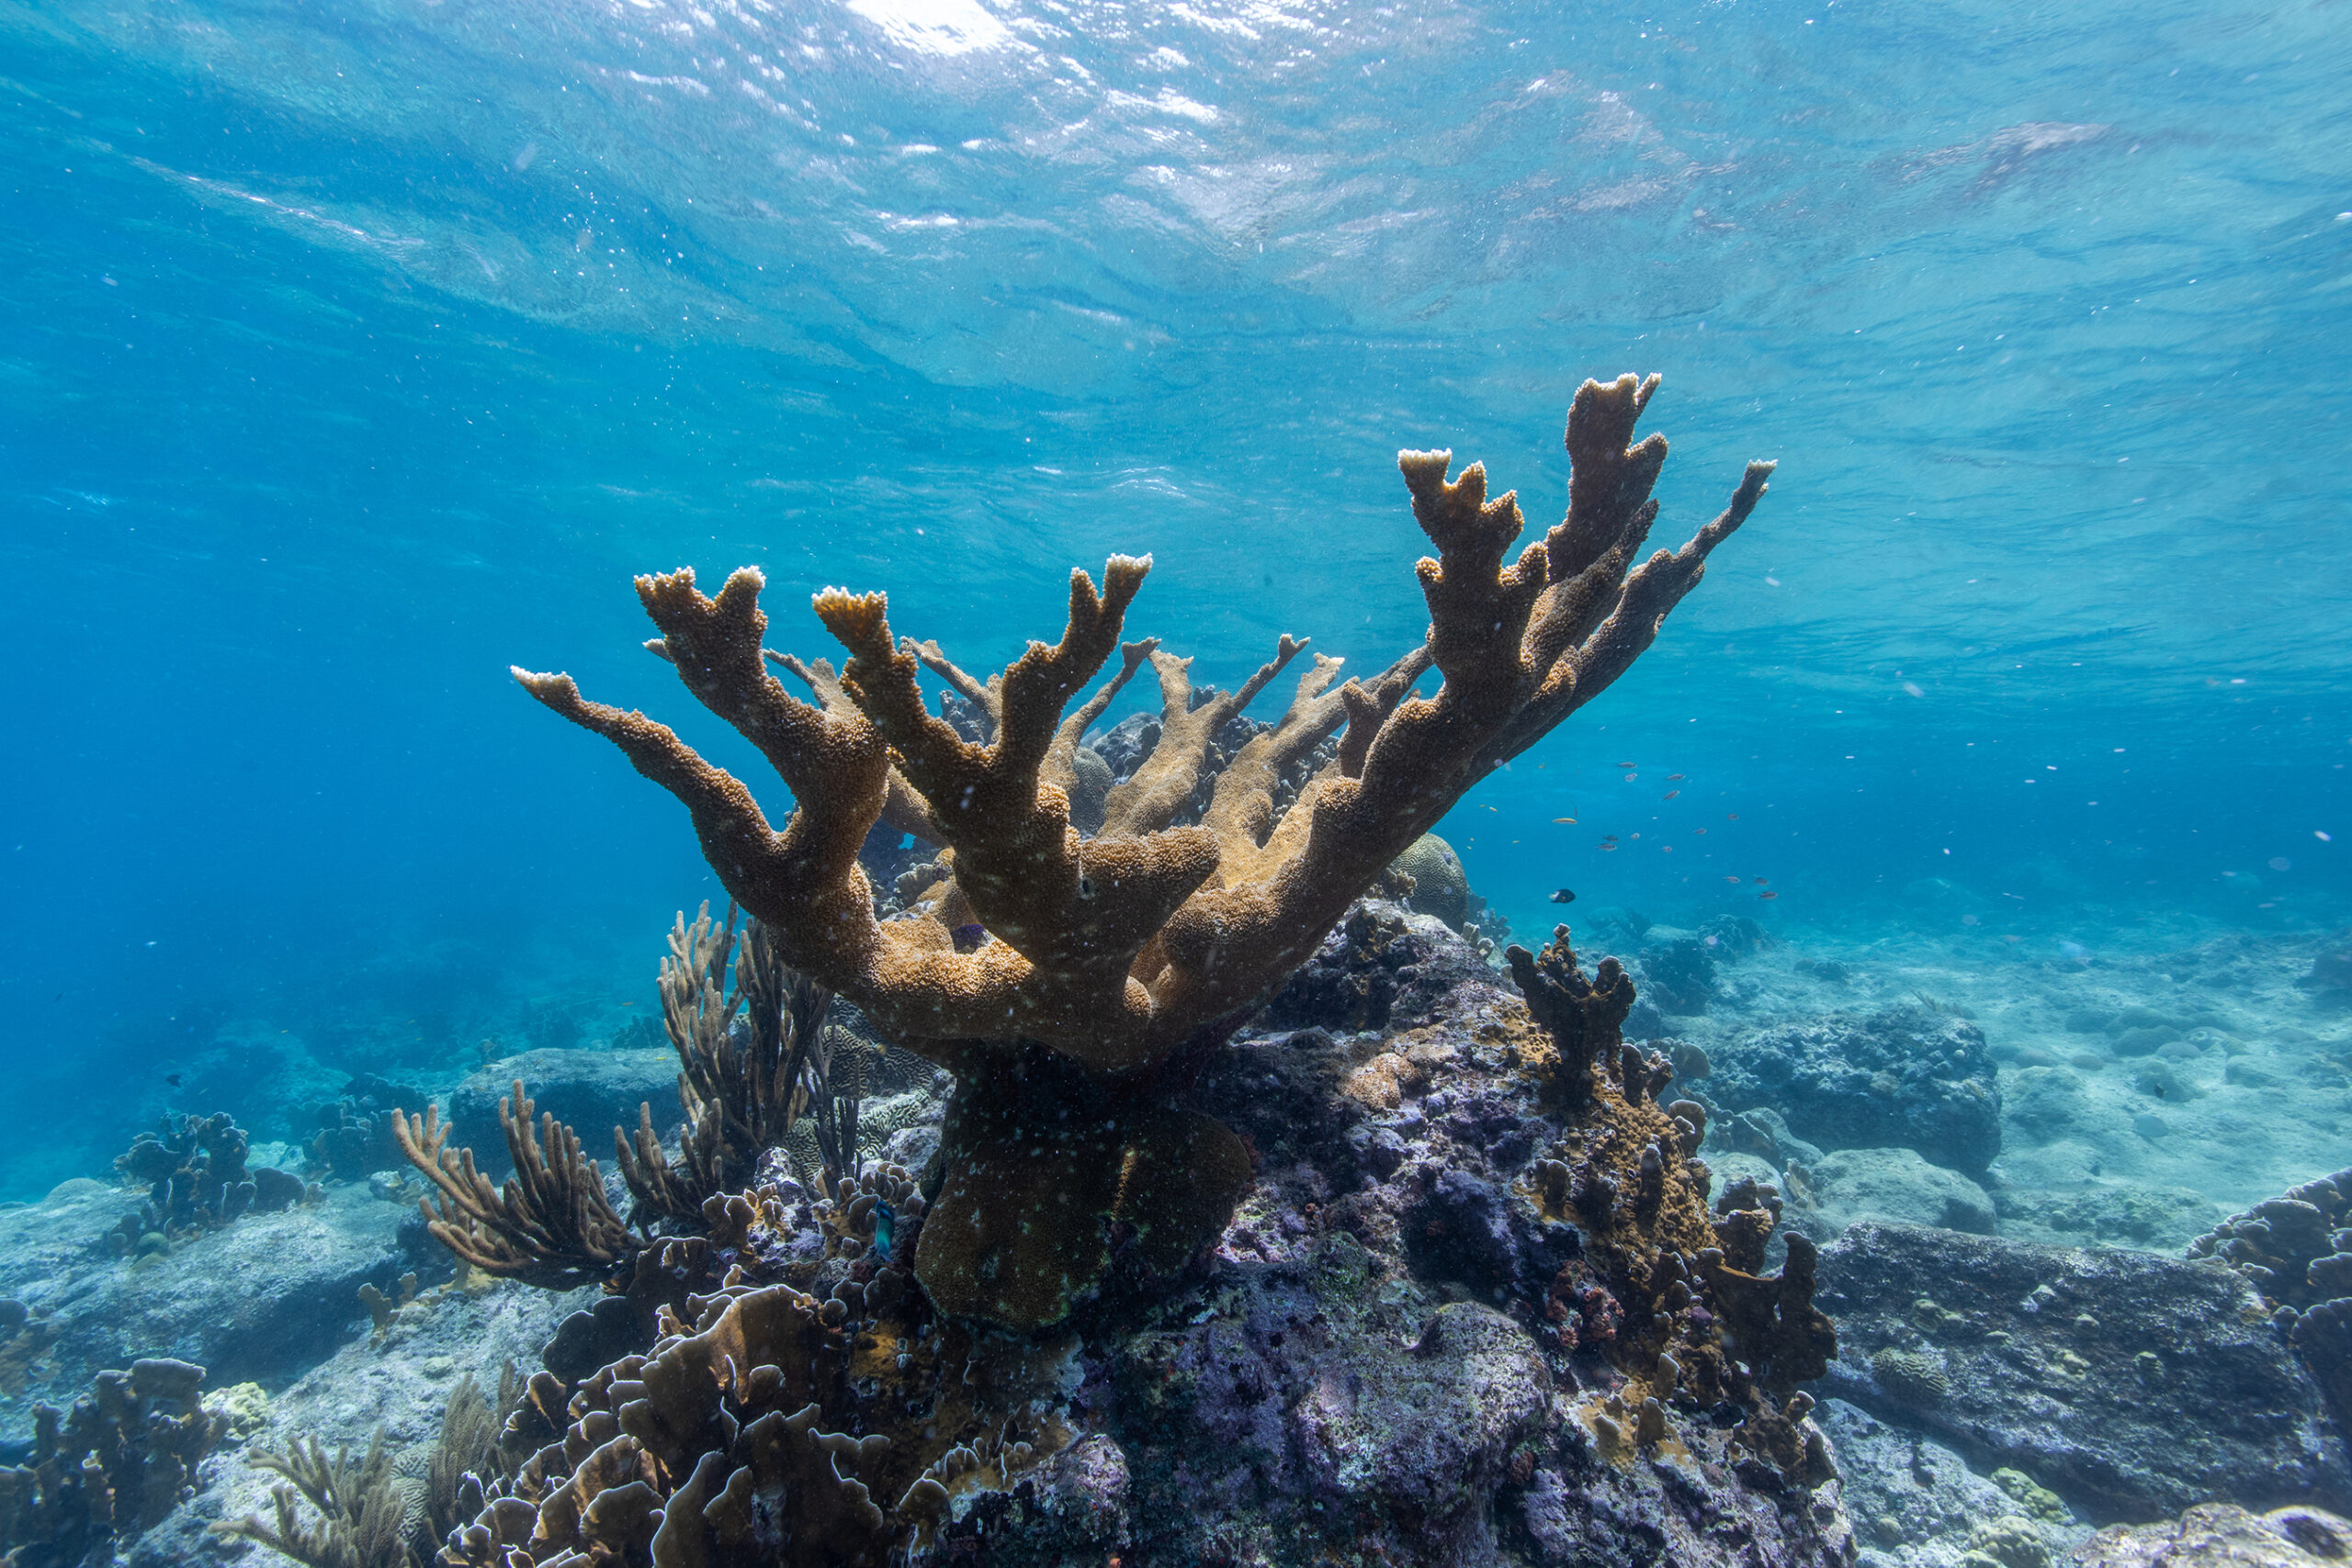 photograph of coral in the ocean, from the Smithsonian Institute